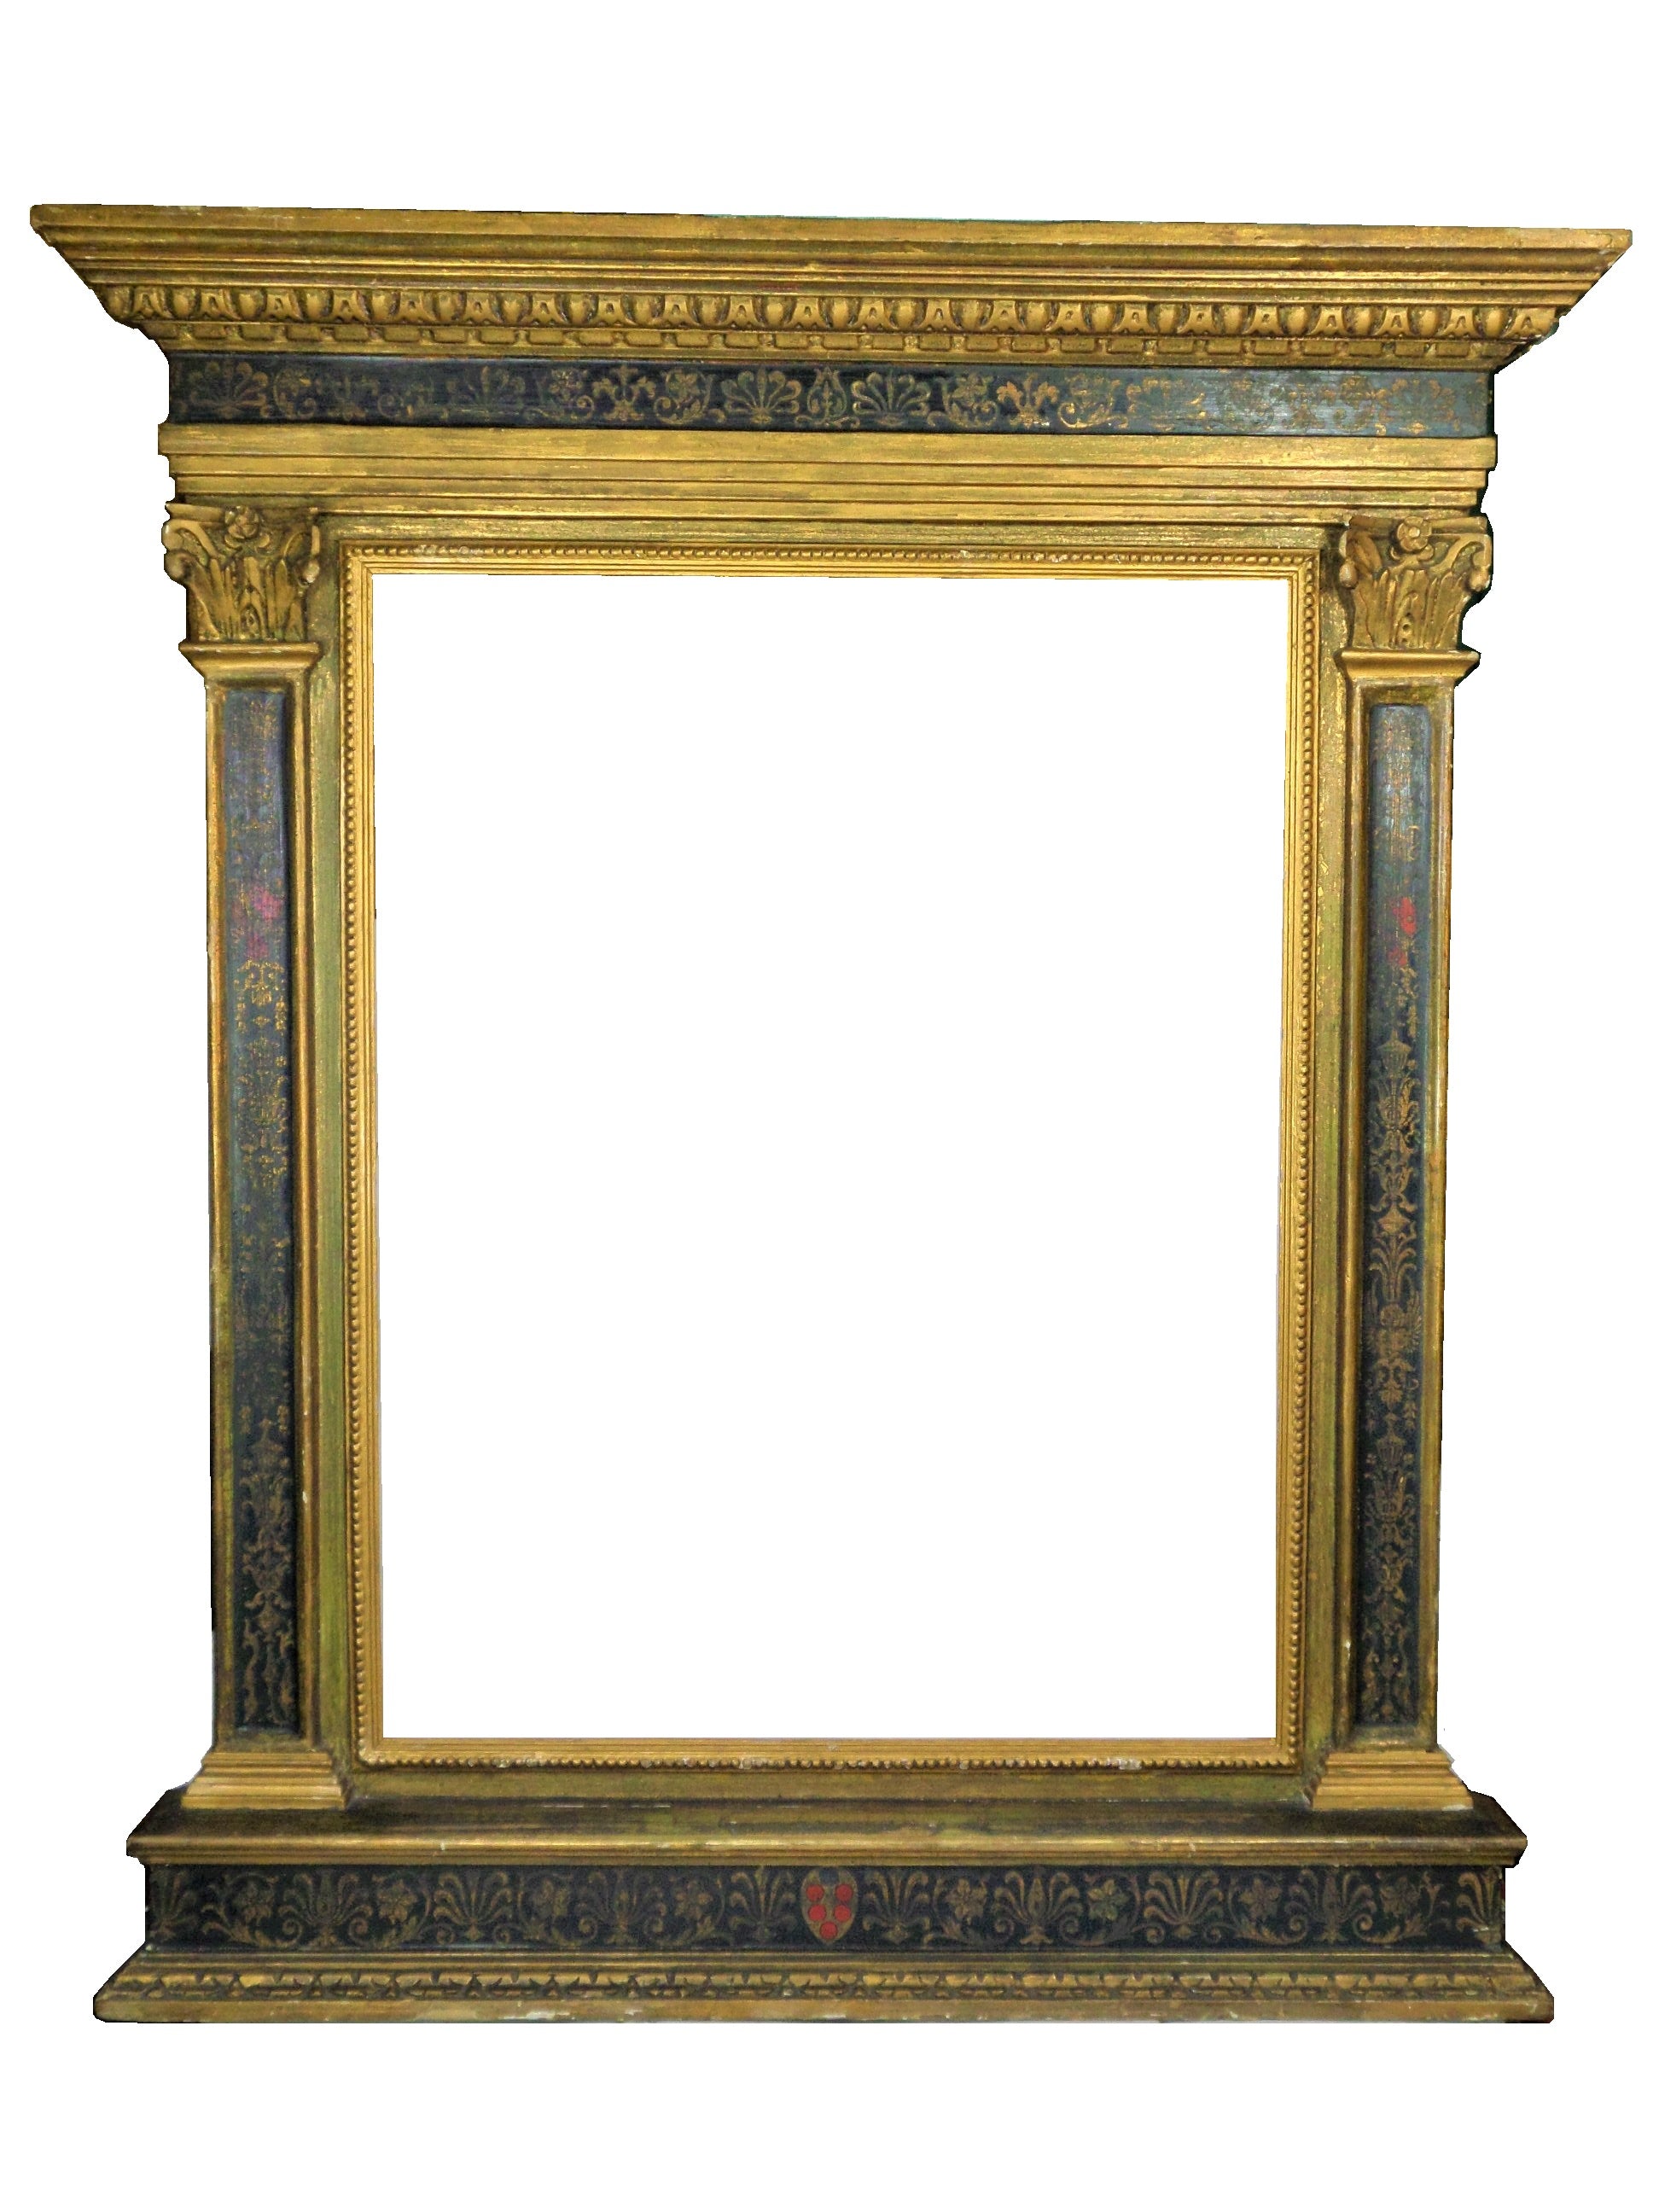 ANTIQUE 19TH CENTURY LARGE TABERNACLE PICTURE FRAME